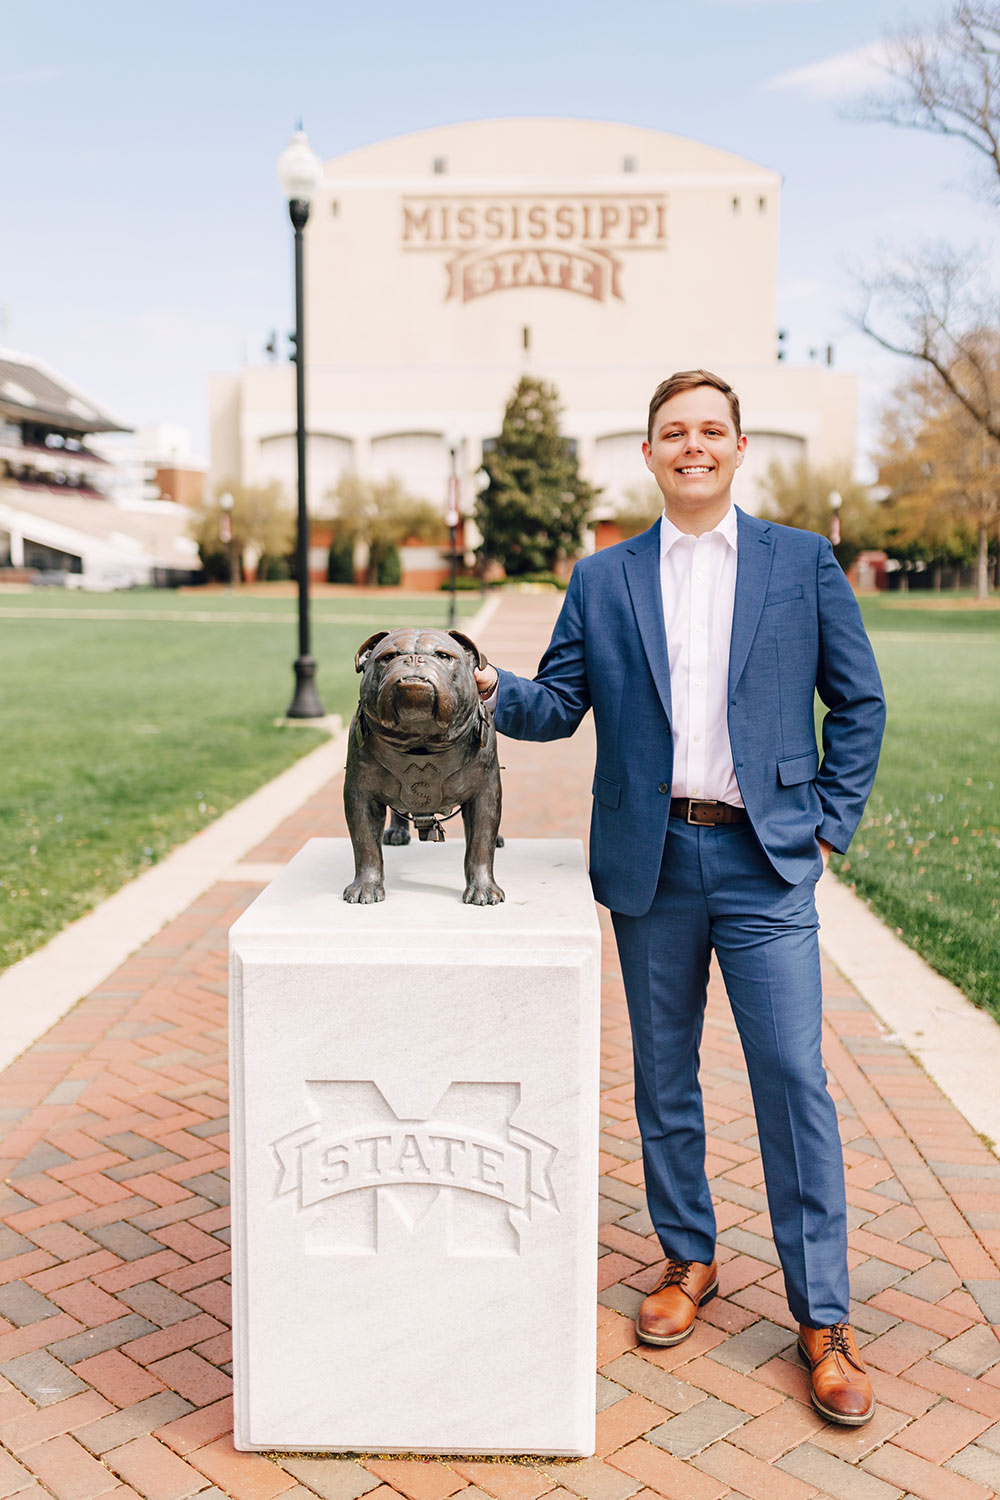 Baron Necaise stands to right of Bully statue with MSU stadium in background